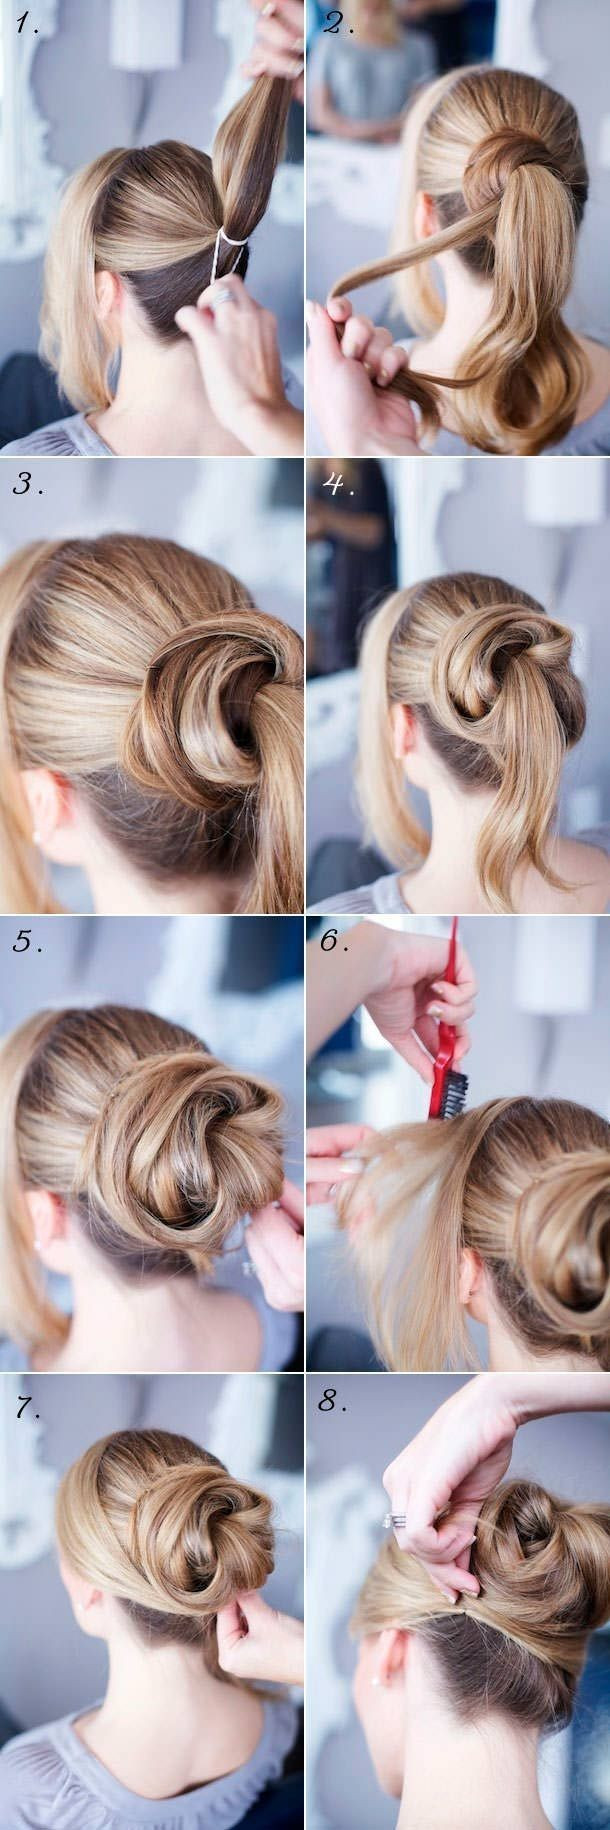 Updo Hairstyles Tutorial
 14 Easy Step by Step Updo Hairstyles Tutorials Pretty